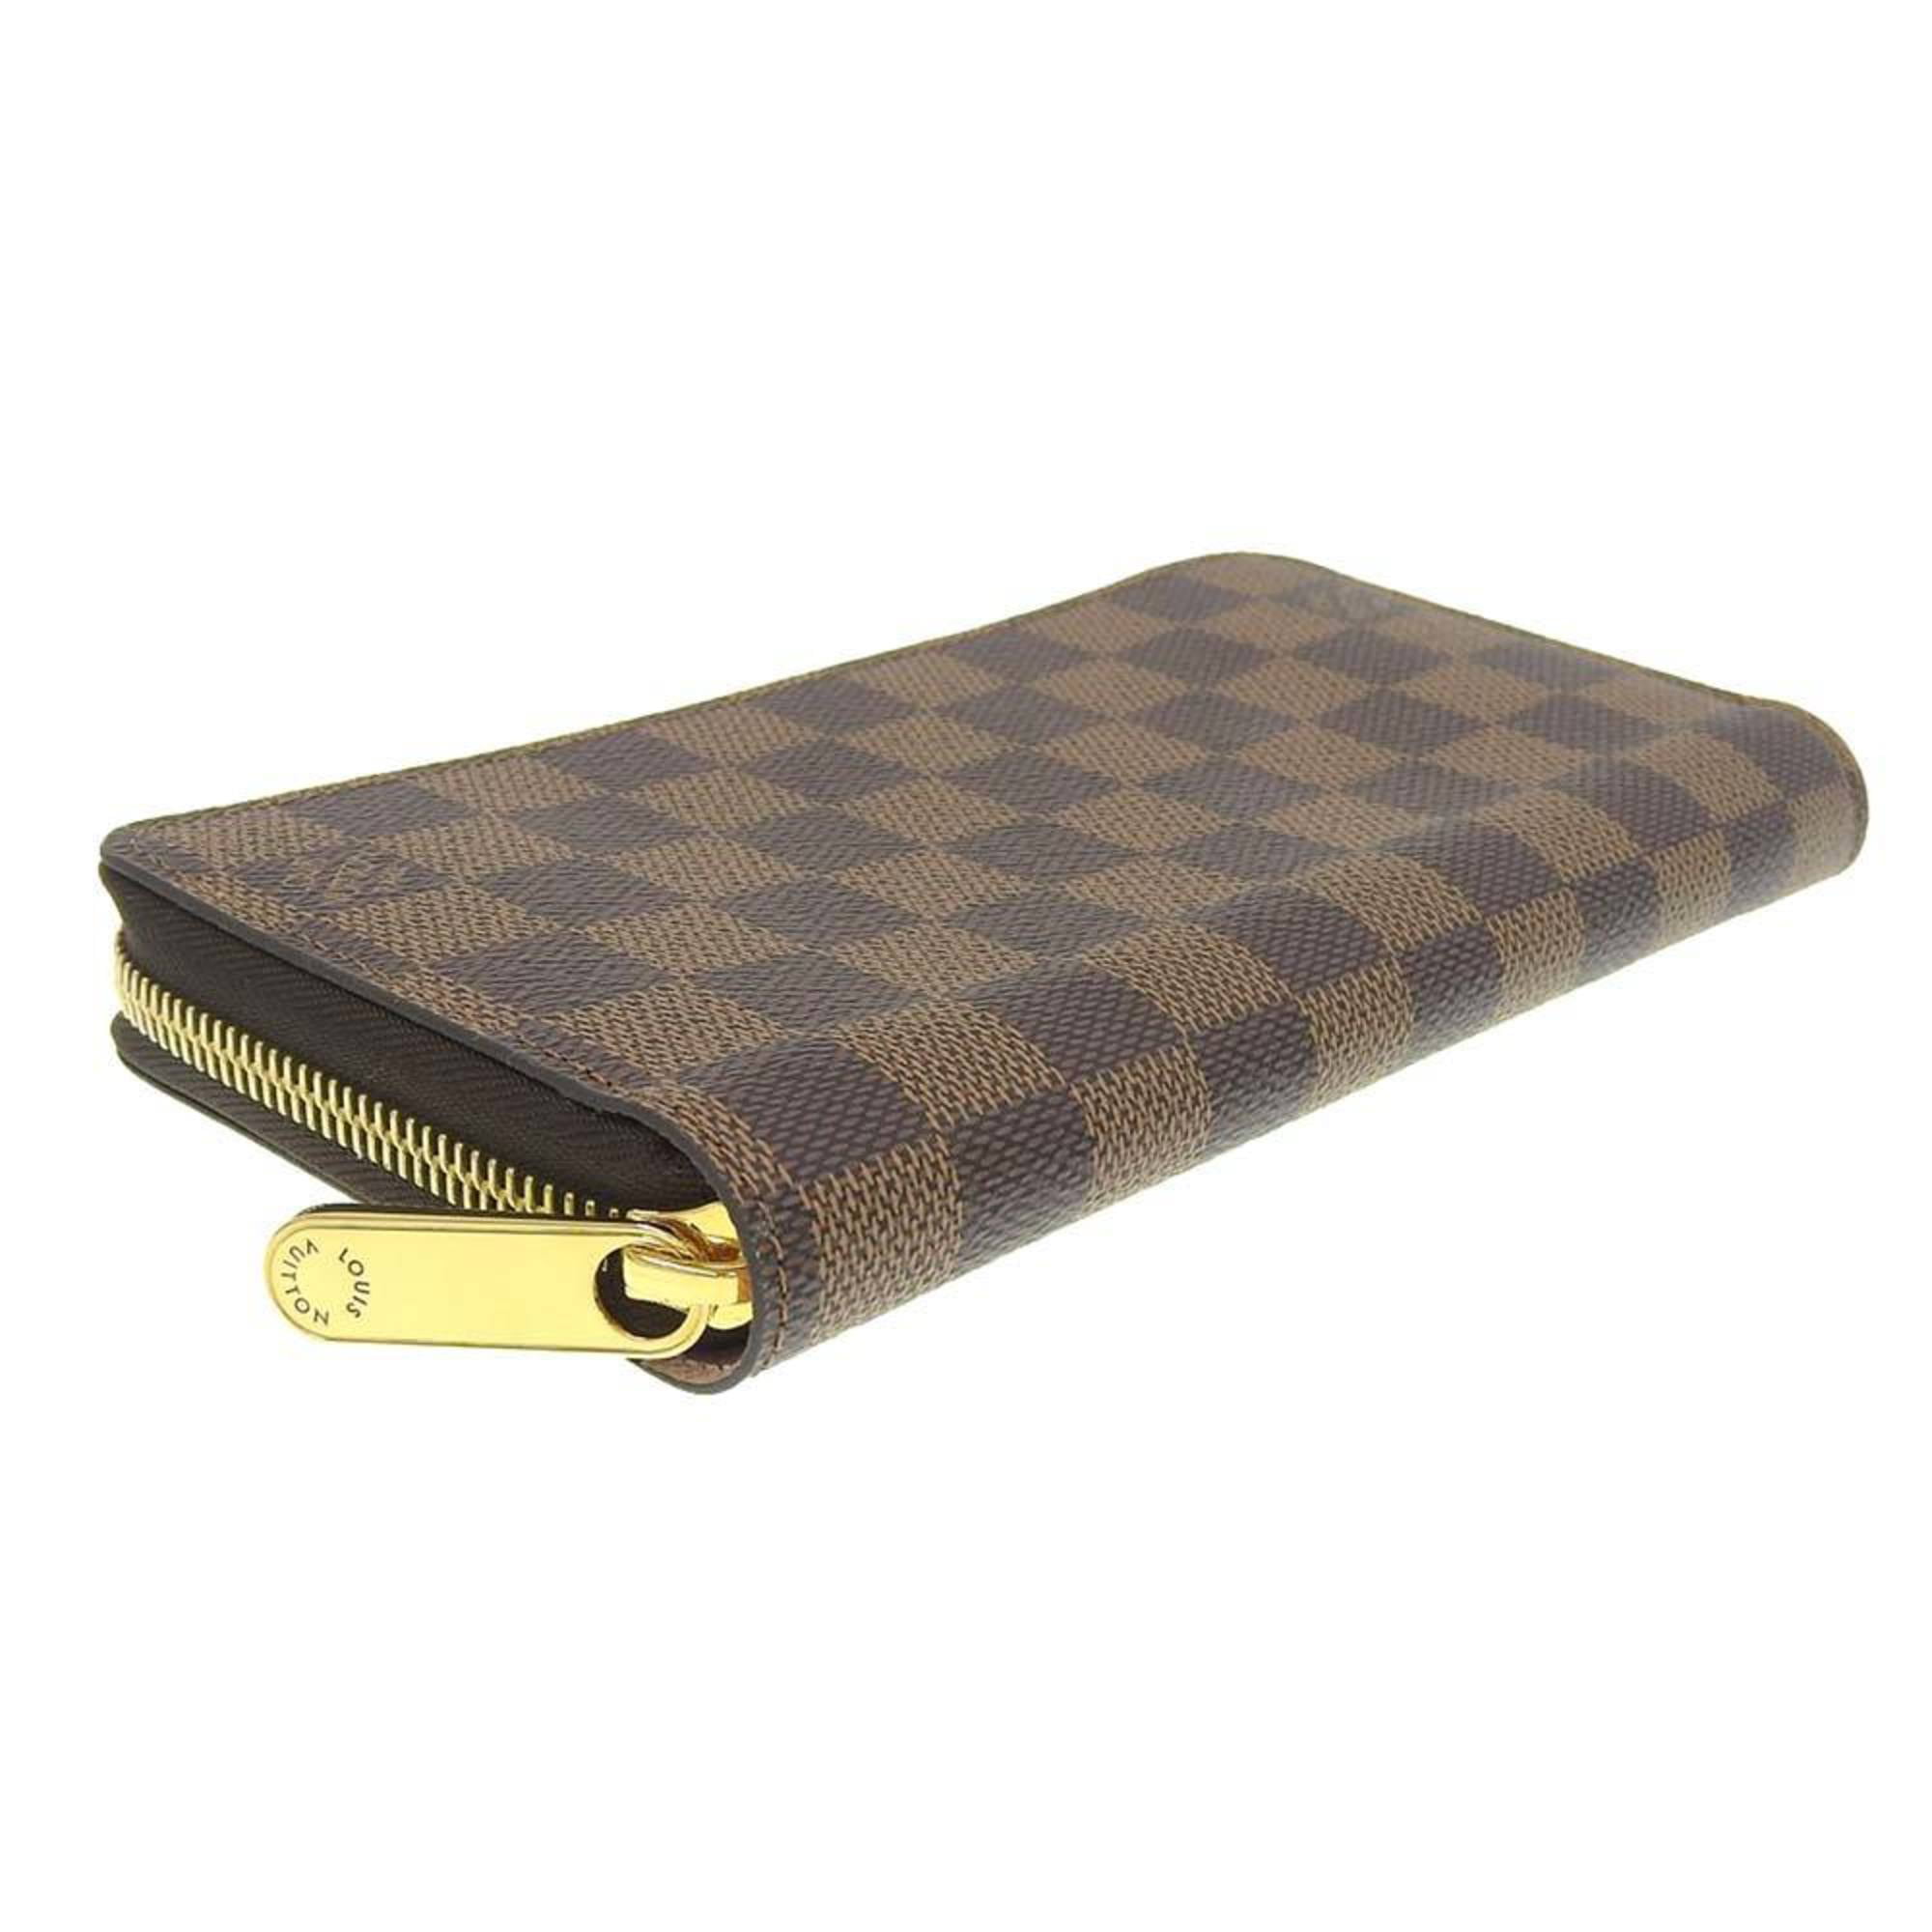 Buy LOUIS VUITTON Zippy Wallet M69427 Long Wallet Boa de Rose / 080033  [Used] from Japan - Buy authentic Plus exclusive items from Japan